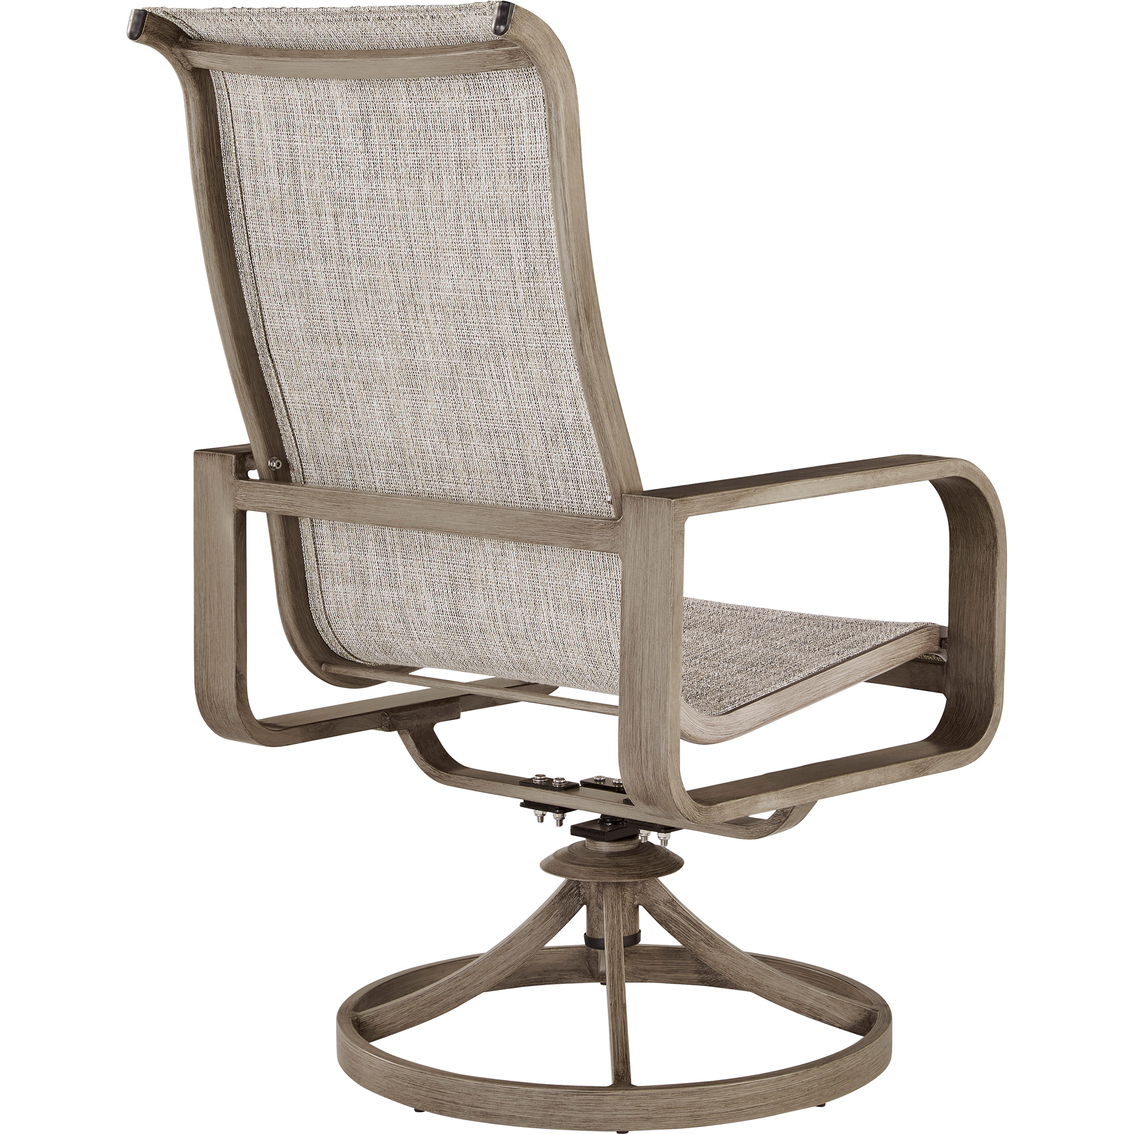 Signature Design by Ashley Beach Front Sling Swivel Chair 2 pk. - Image 3 of 5